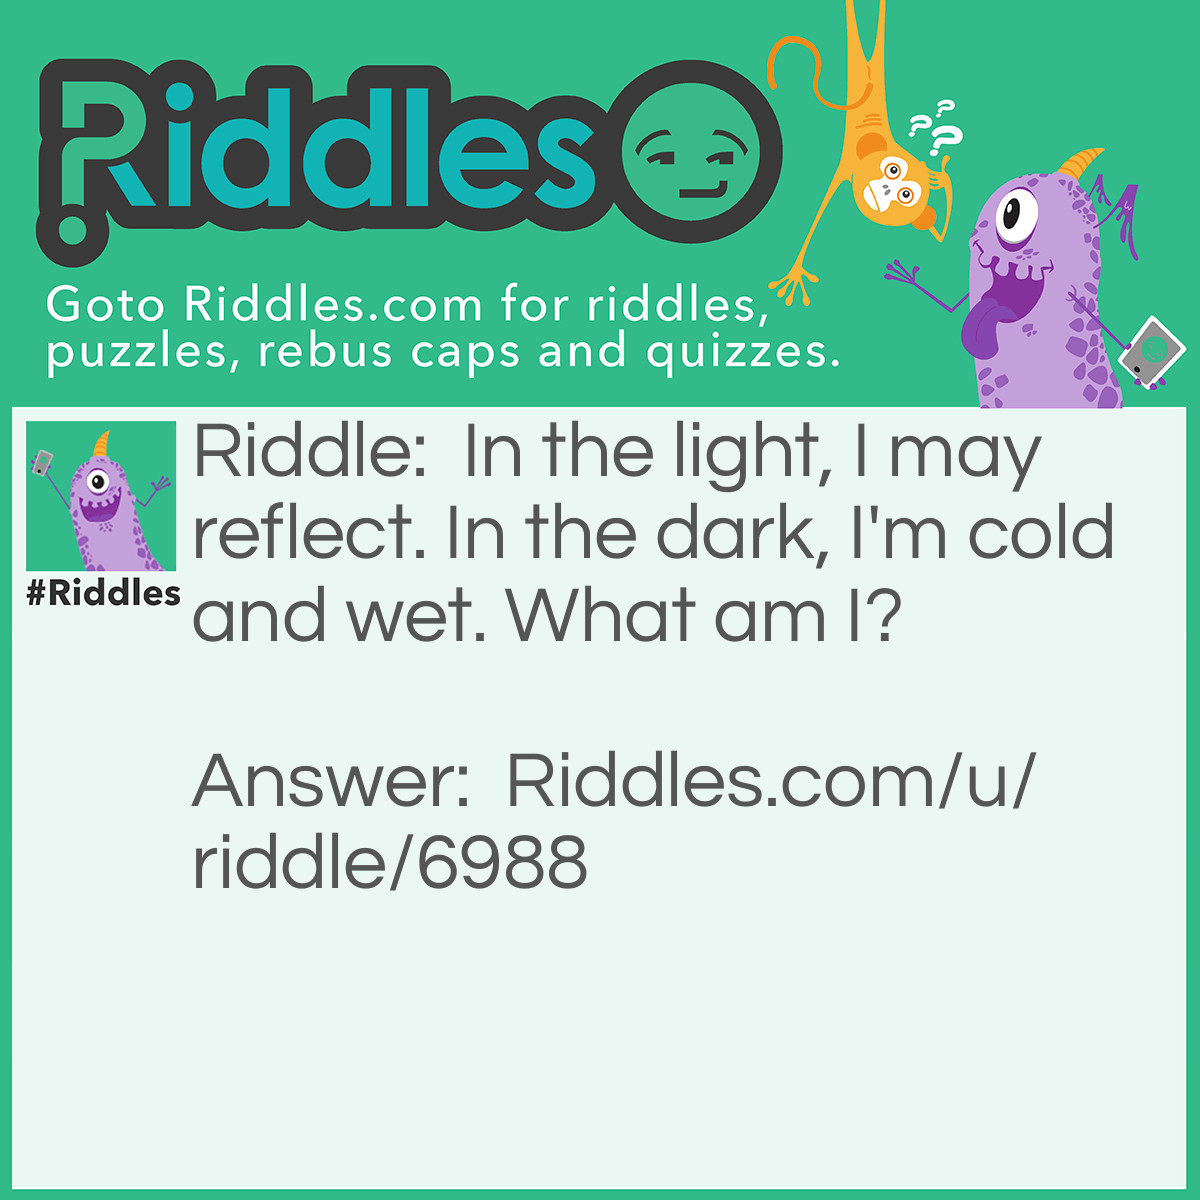 Riddle: In the light, I may reflect. In the dark, I'm cold and wet. What am I? Answer: Water.